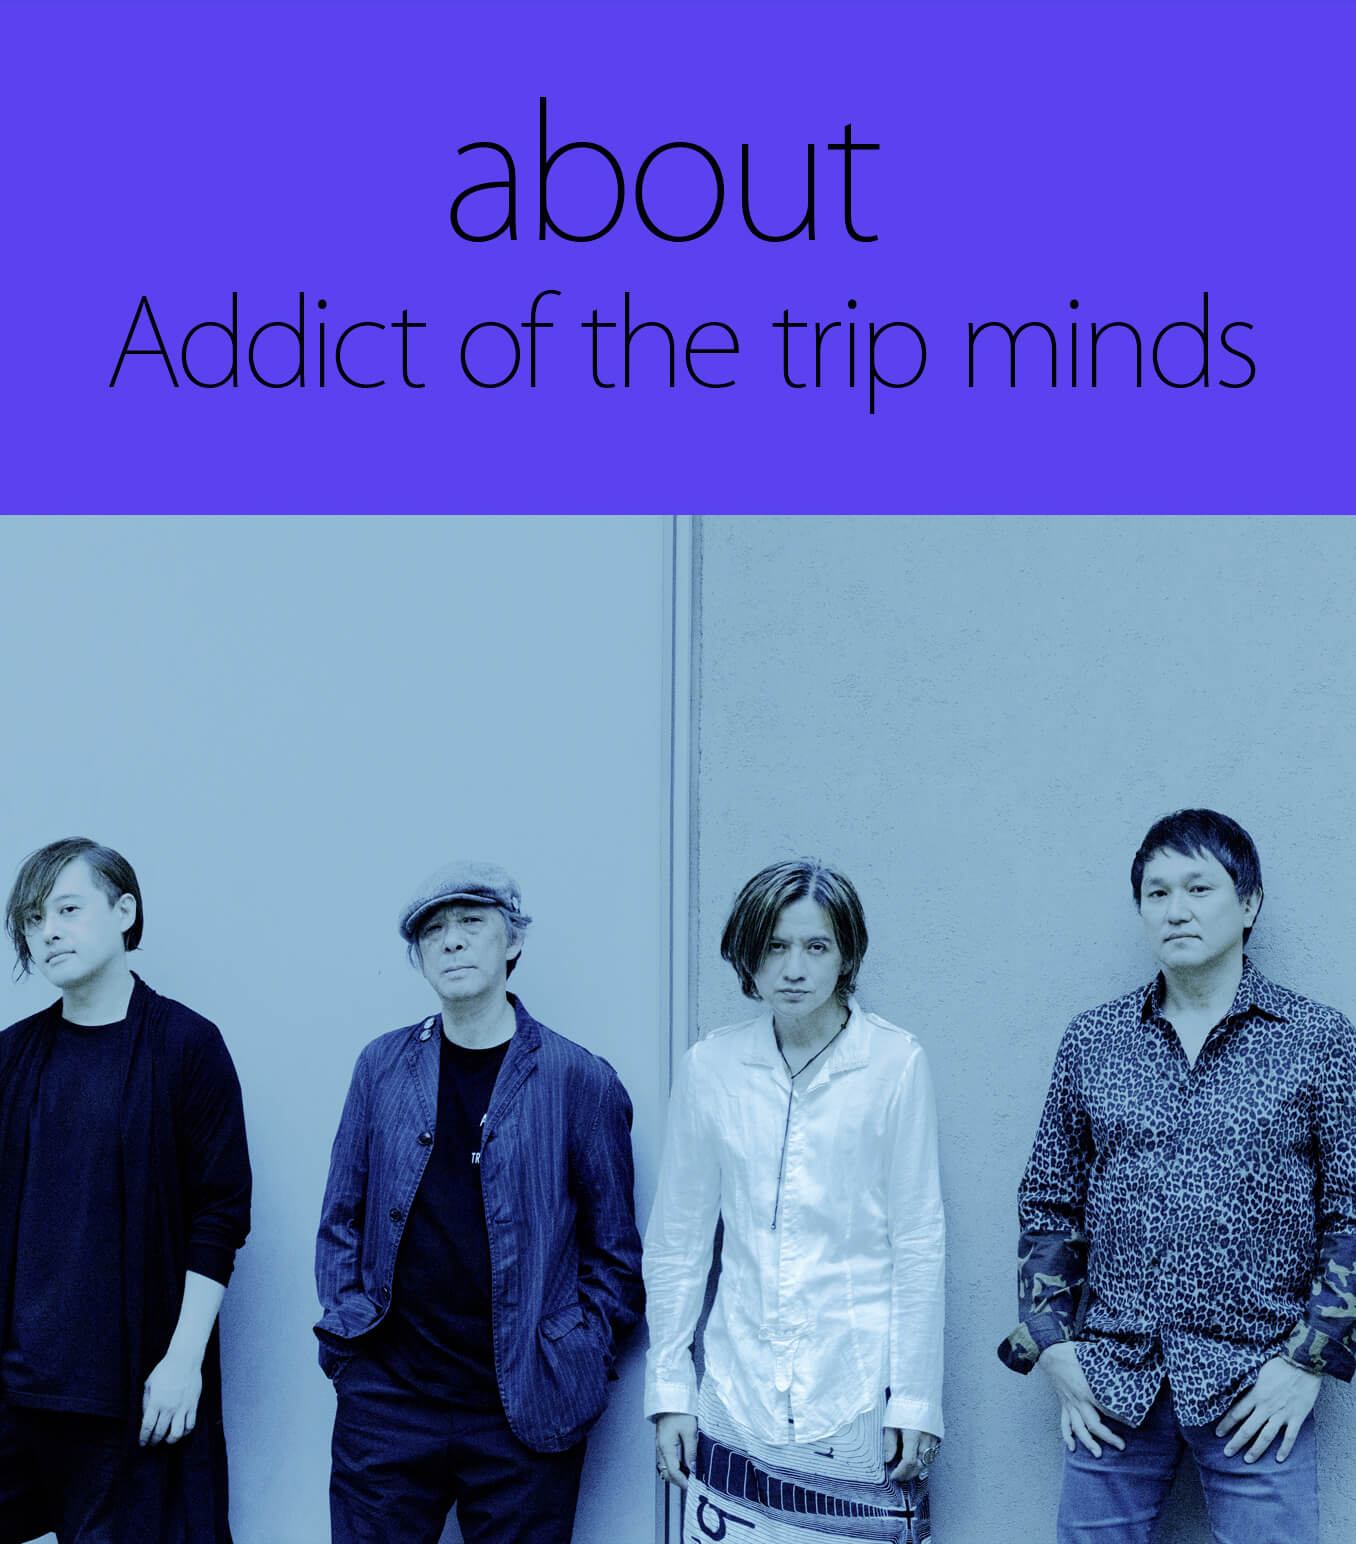 about Addict of the trip minds